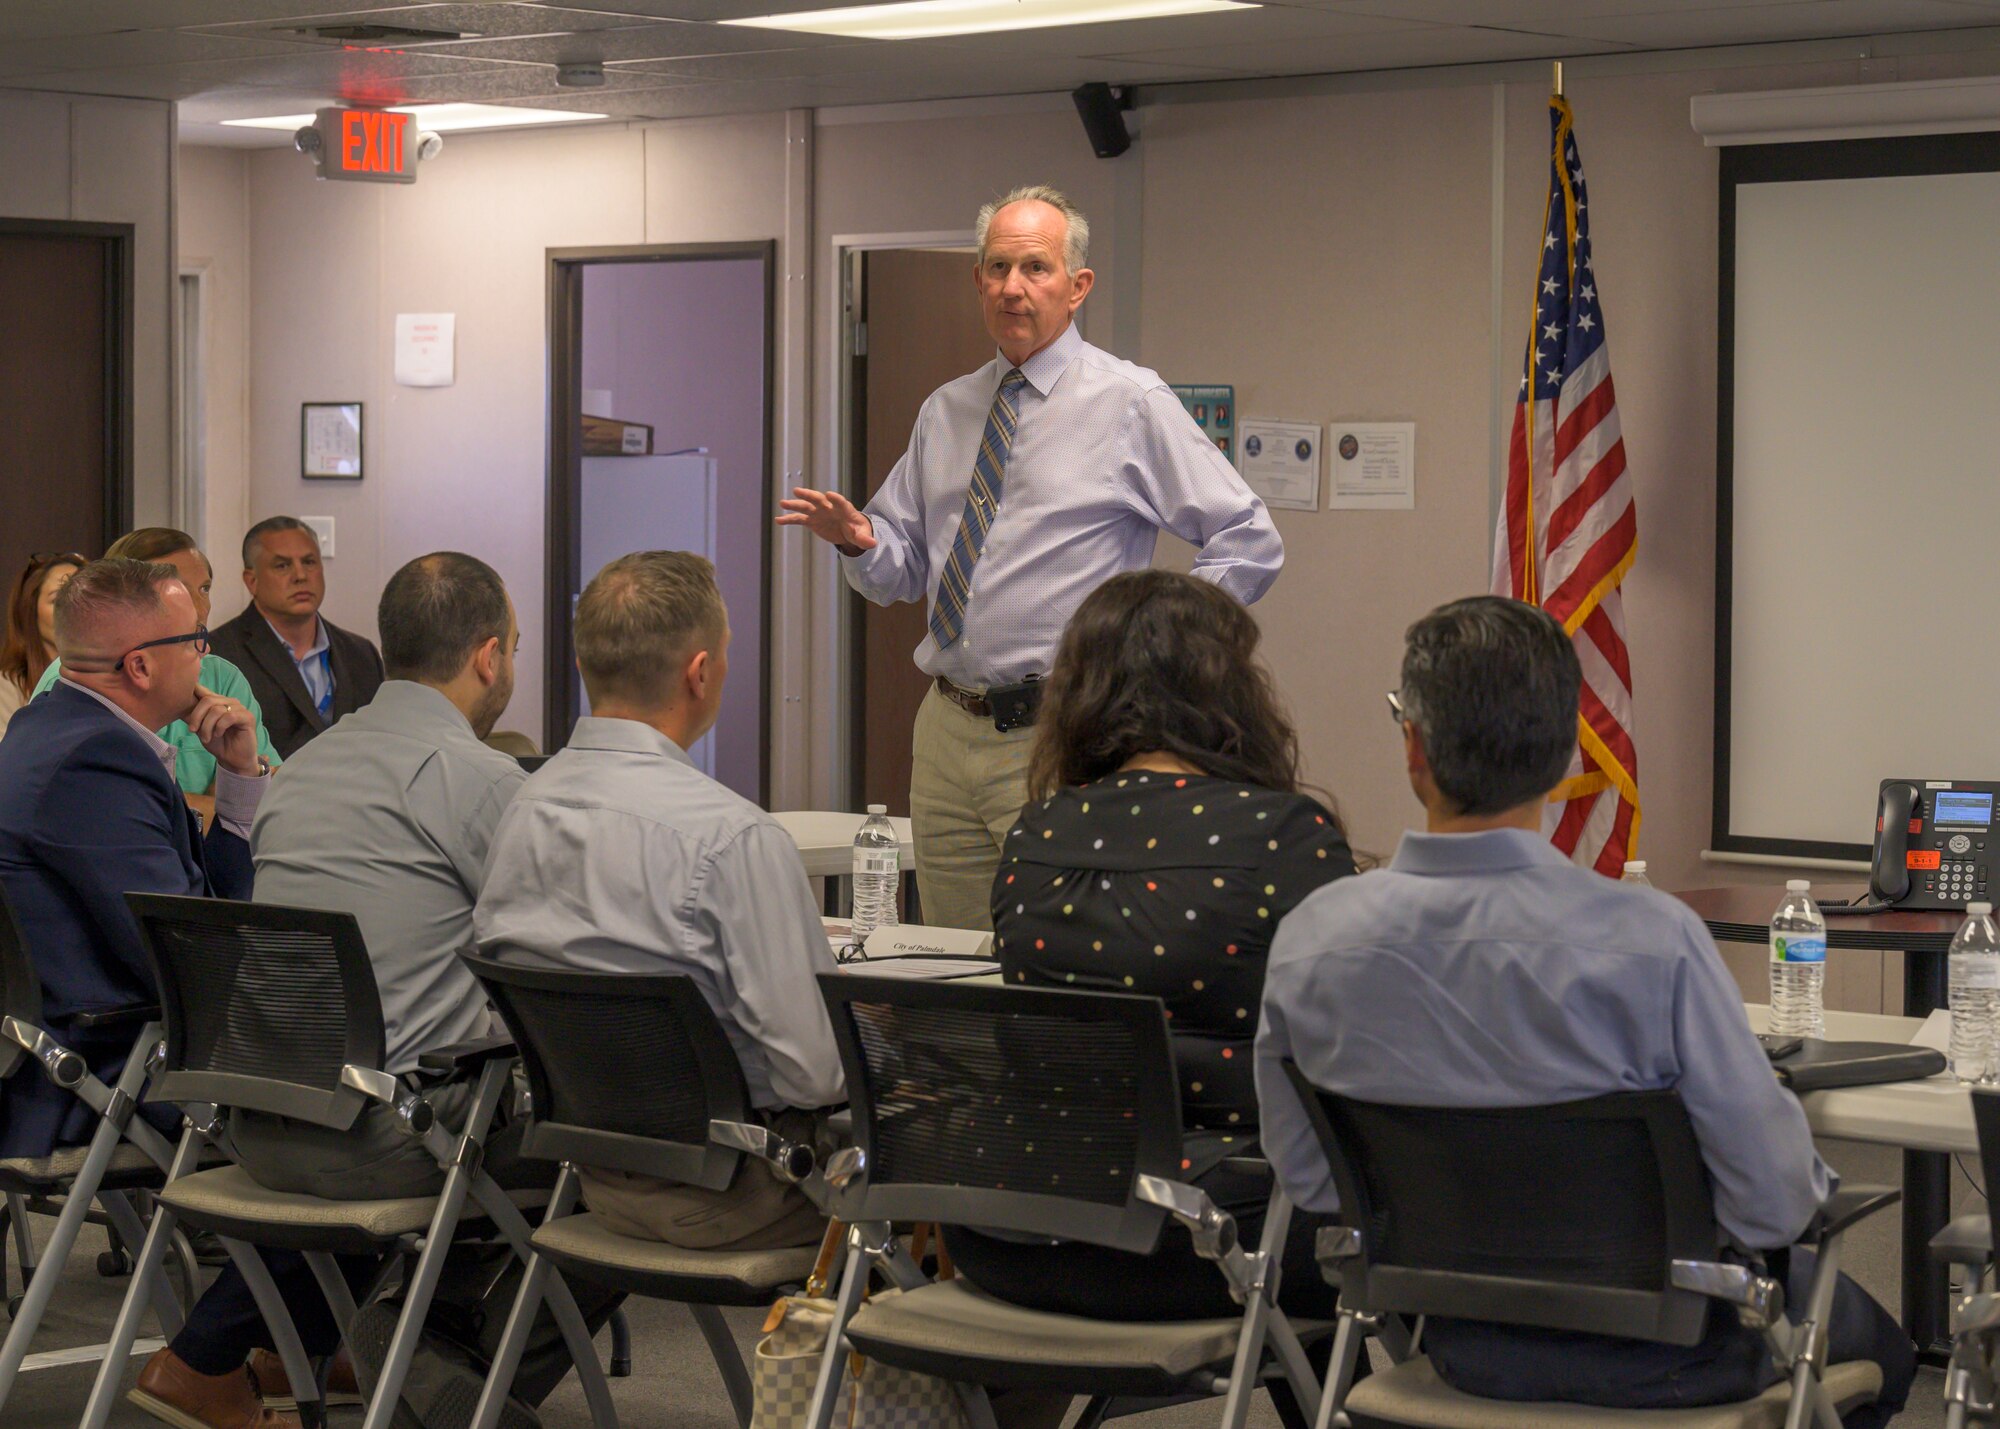 Dr. David Smith, Plant 42 director, provides opening remarks during a meeting between local civic leaders to discuss traffic safety around Plant 42 in Palmdale, California, June 30. (Air Force photo by Giancarlo Casem)